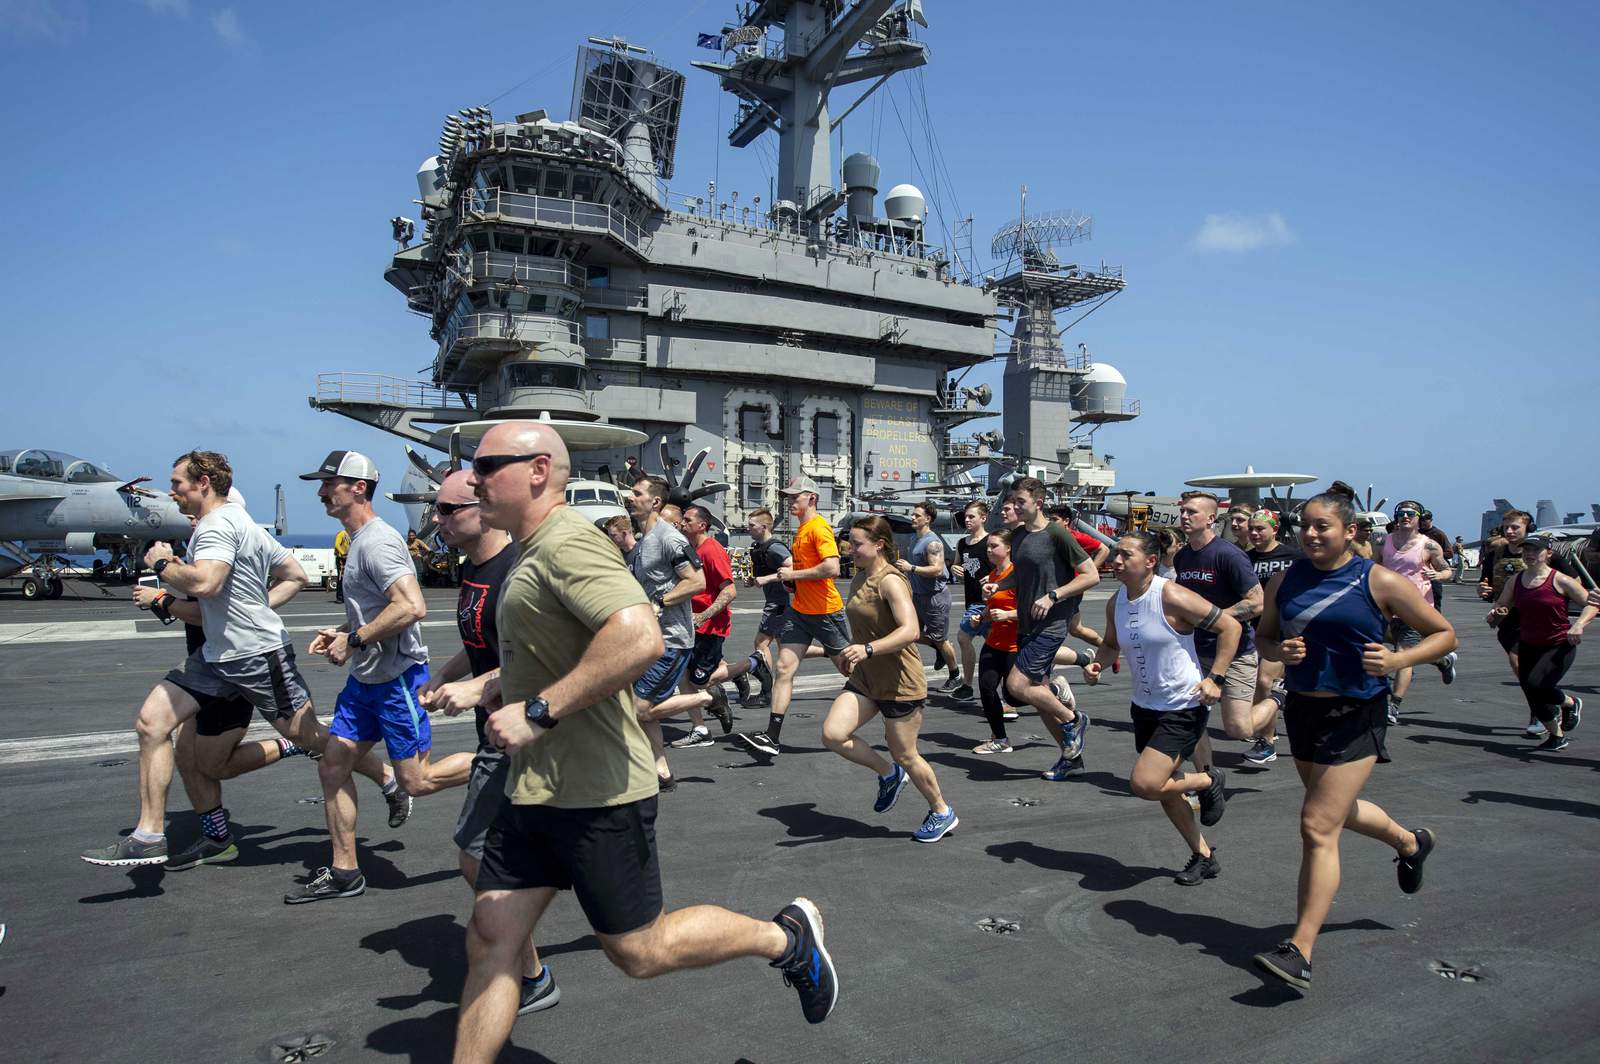 Dodging virus, Navy ships break record for staying at sea